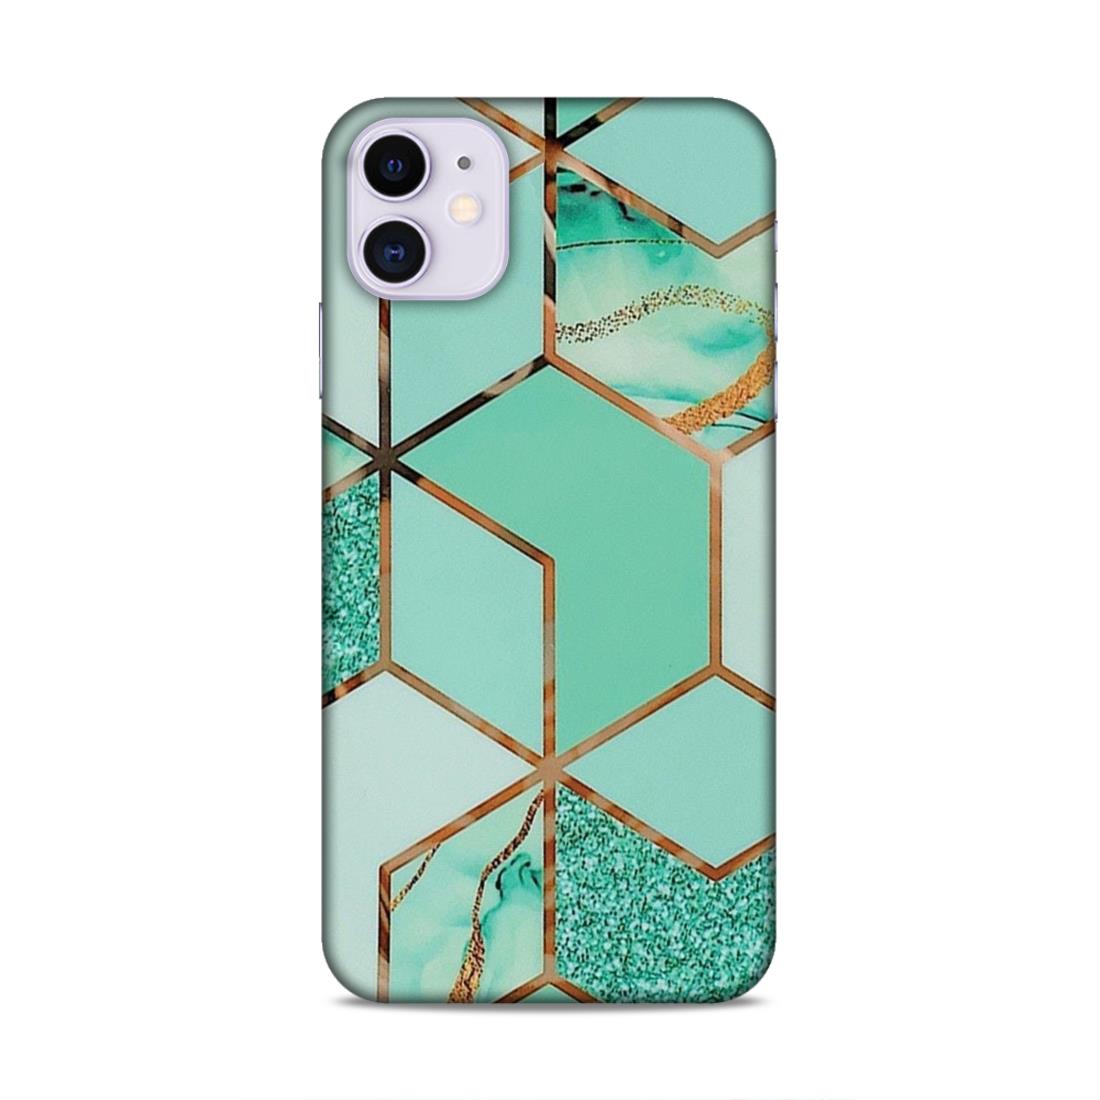 Hexagonal Marble Pattern Hard Back Case For Apple iPhone 11